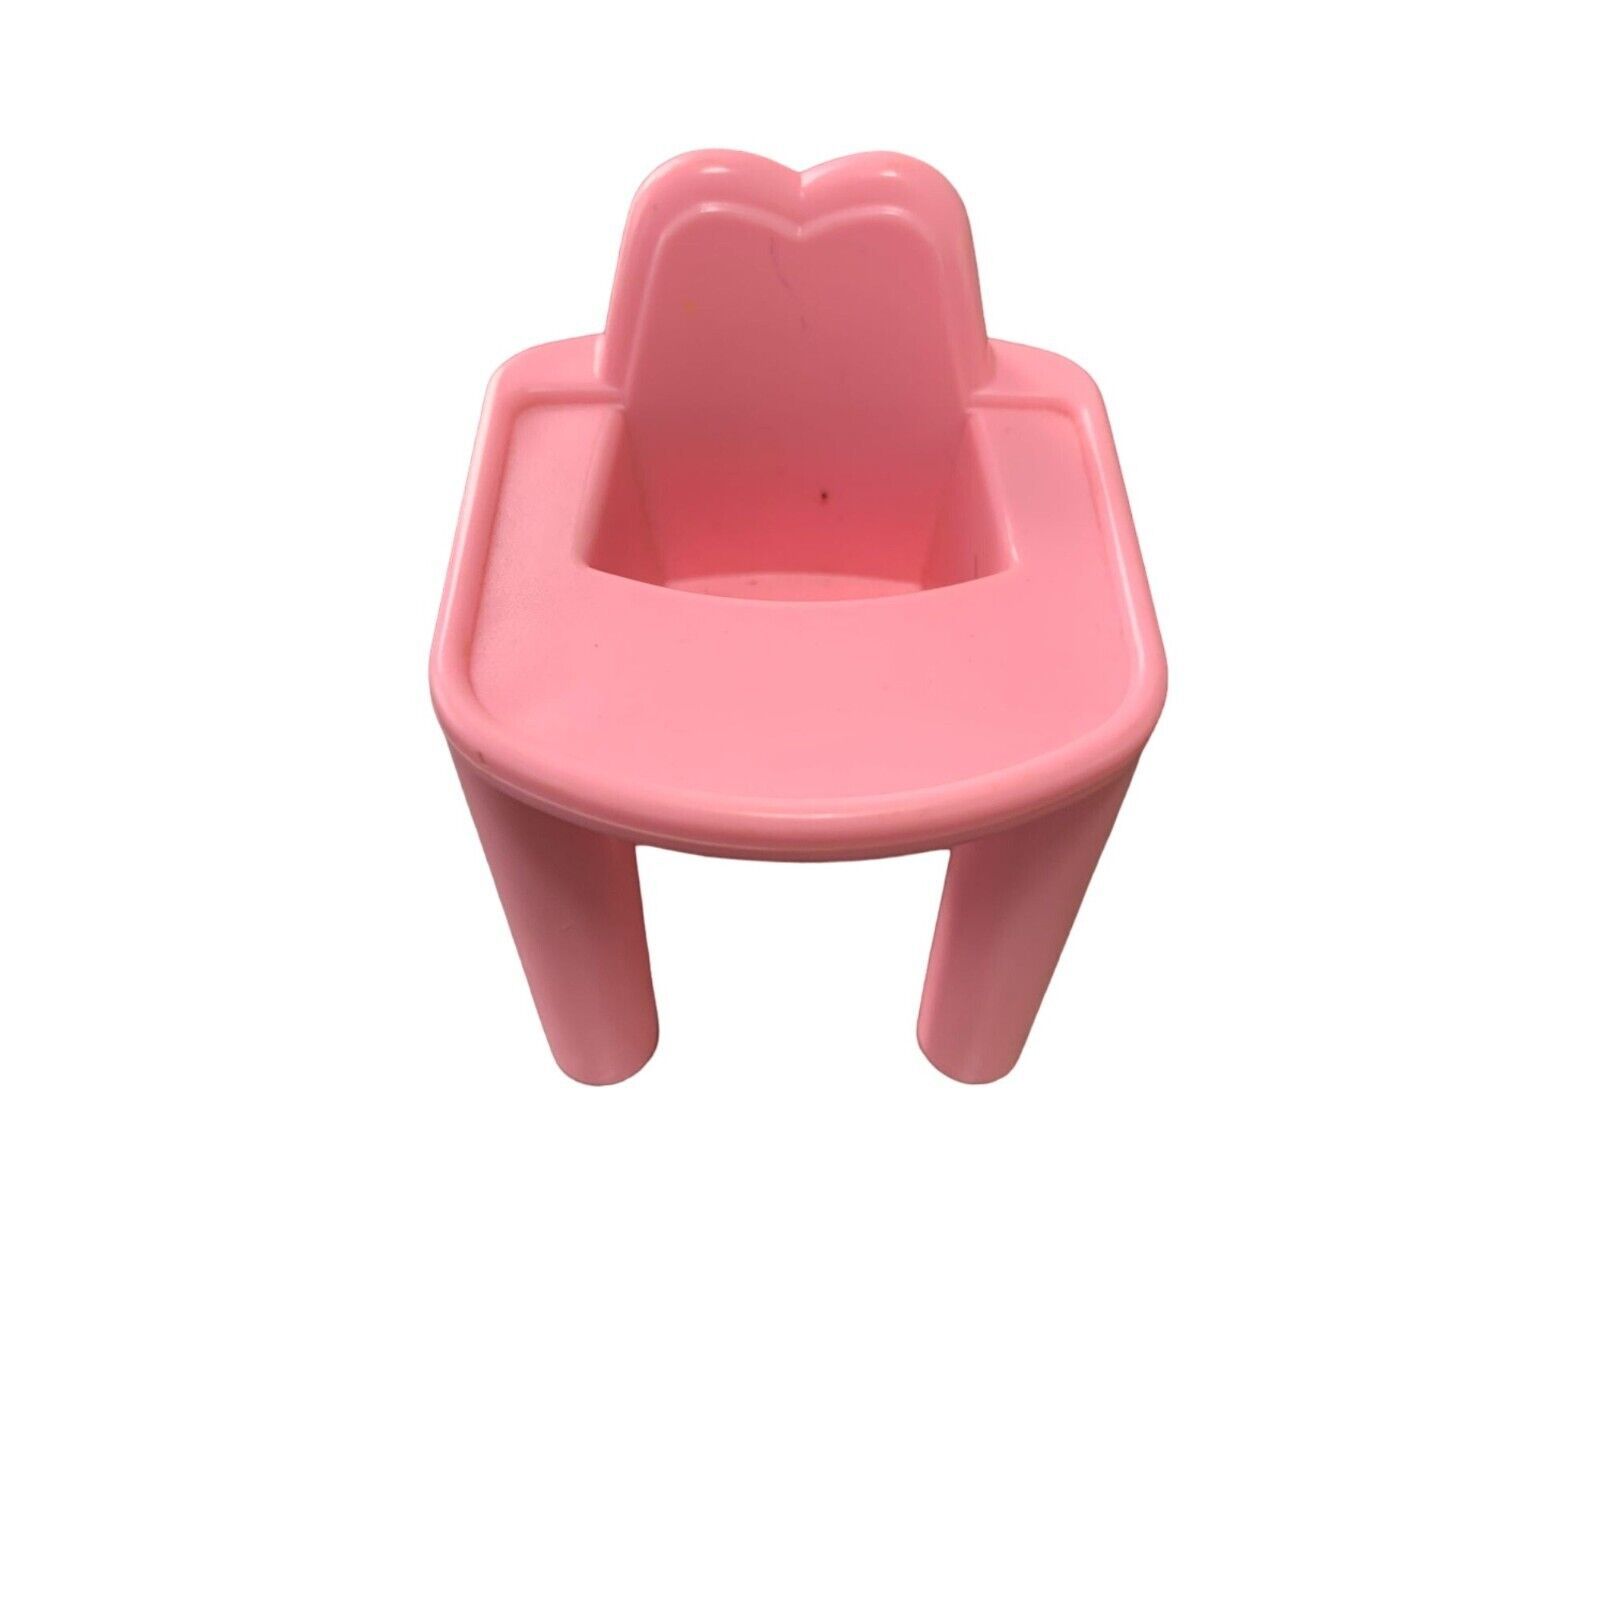 Fisher Price Playskool Victorian Dollhouse Pink Baby High Chair Plastic m-6095 2 - $10.88